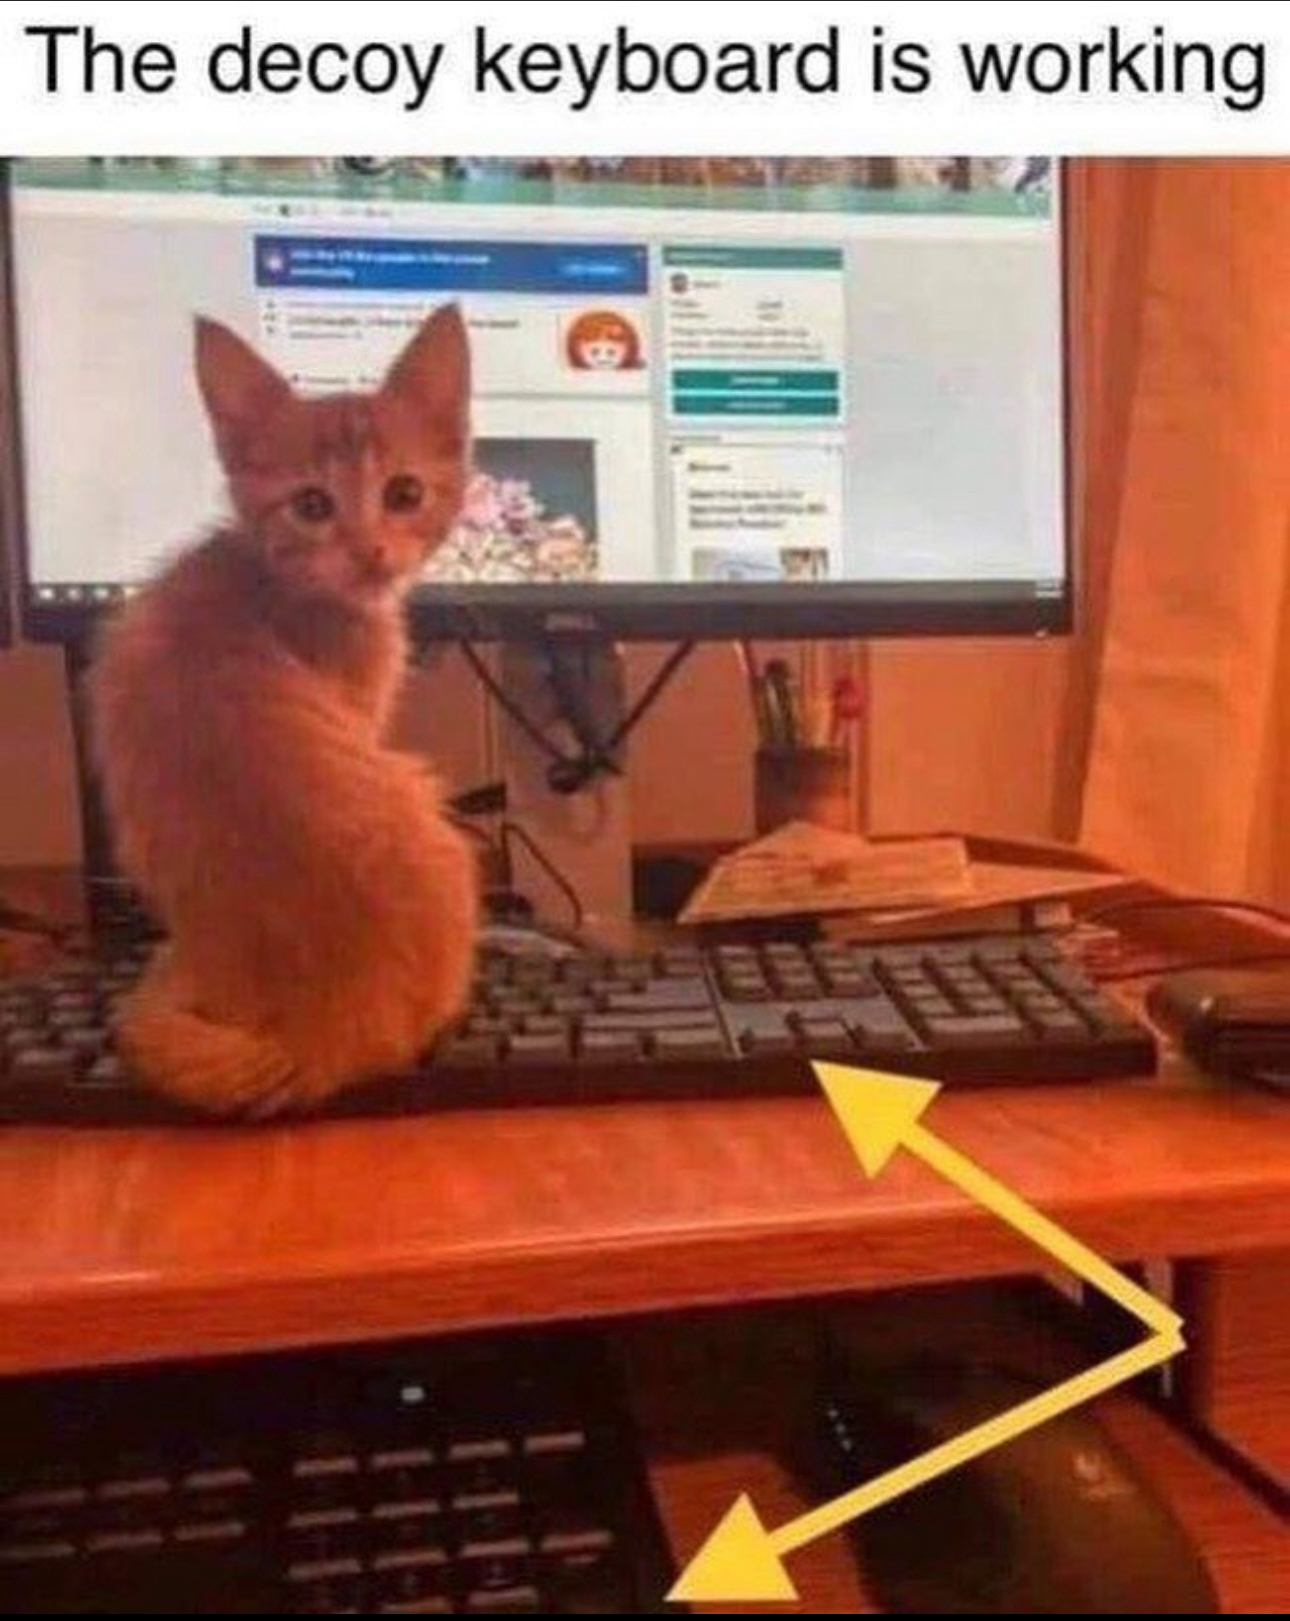 A small orange kitten sitting on a computer keyboard with text above that reads “The decoy keyboard is working,” and an arrow pointing to a second keyboard under the desk.